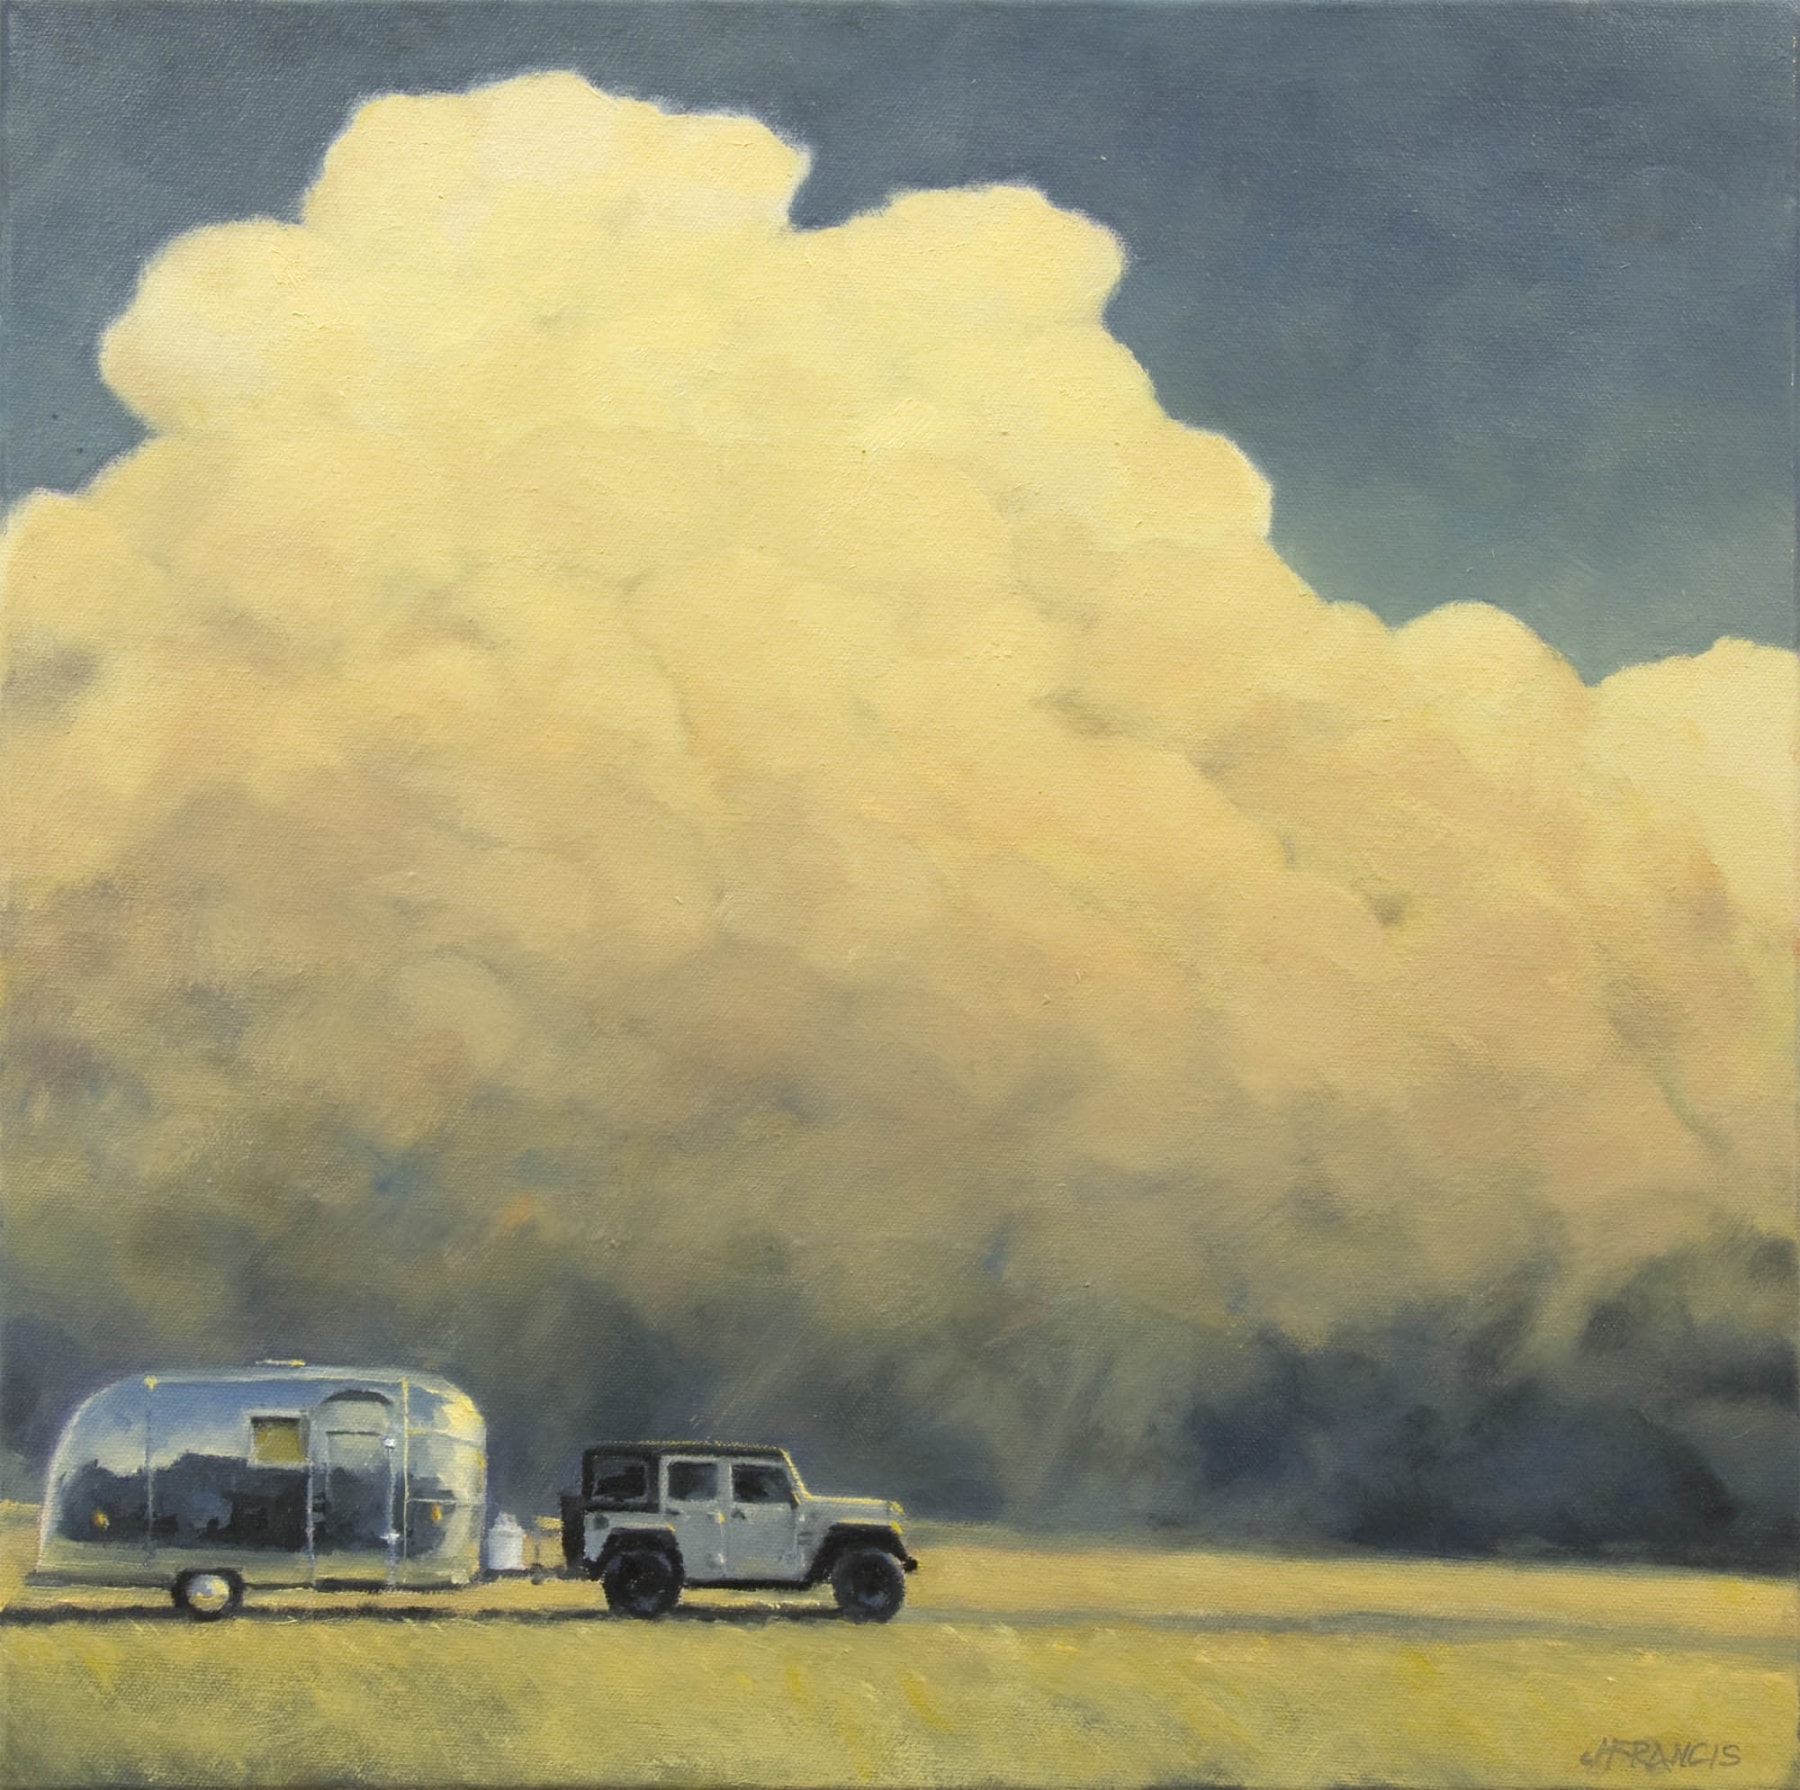 Jon Francis, Storm Chasers, 2017